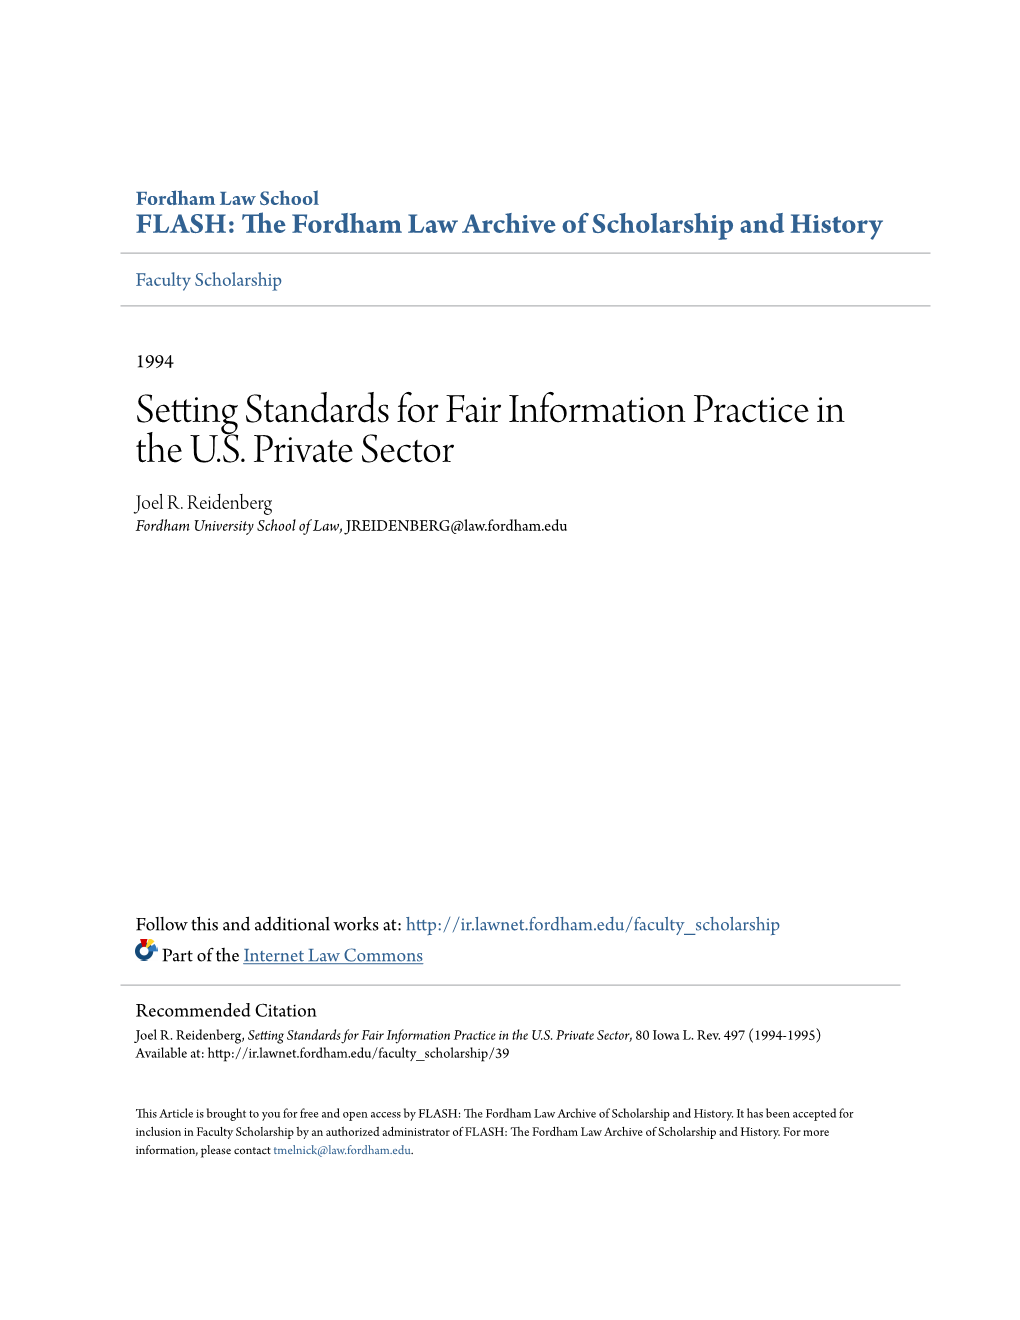 Setting Standards for Fair Information Practice in the U.S. Private Sector Joel R